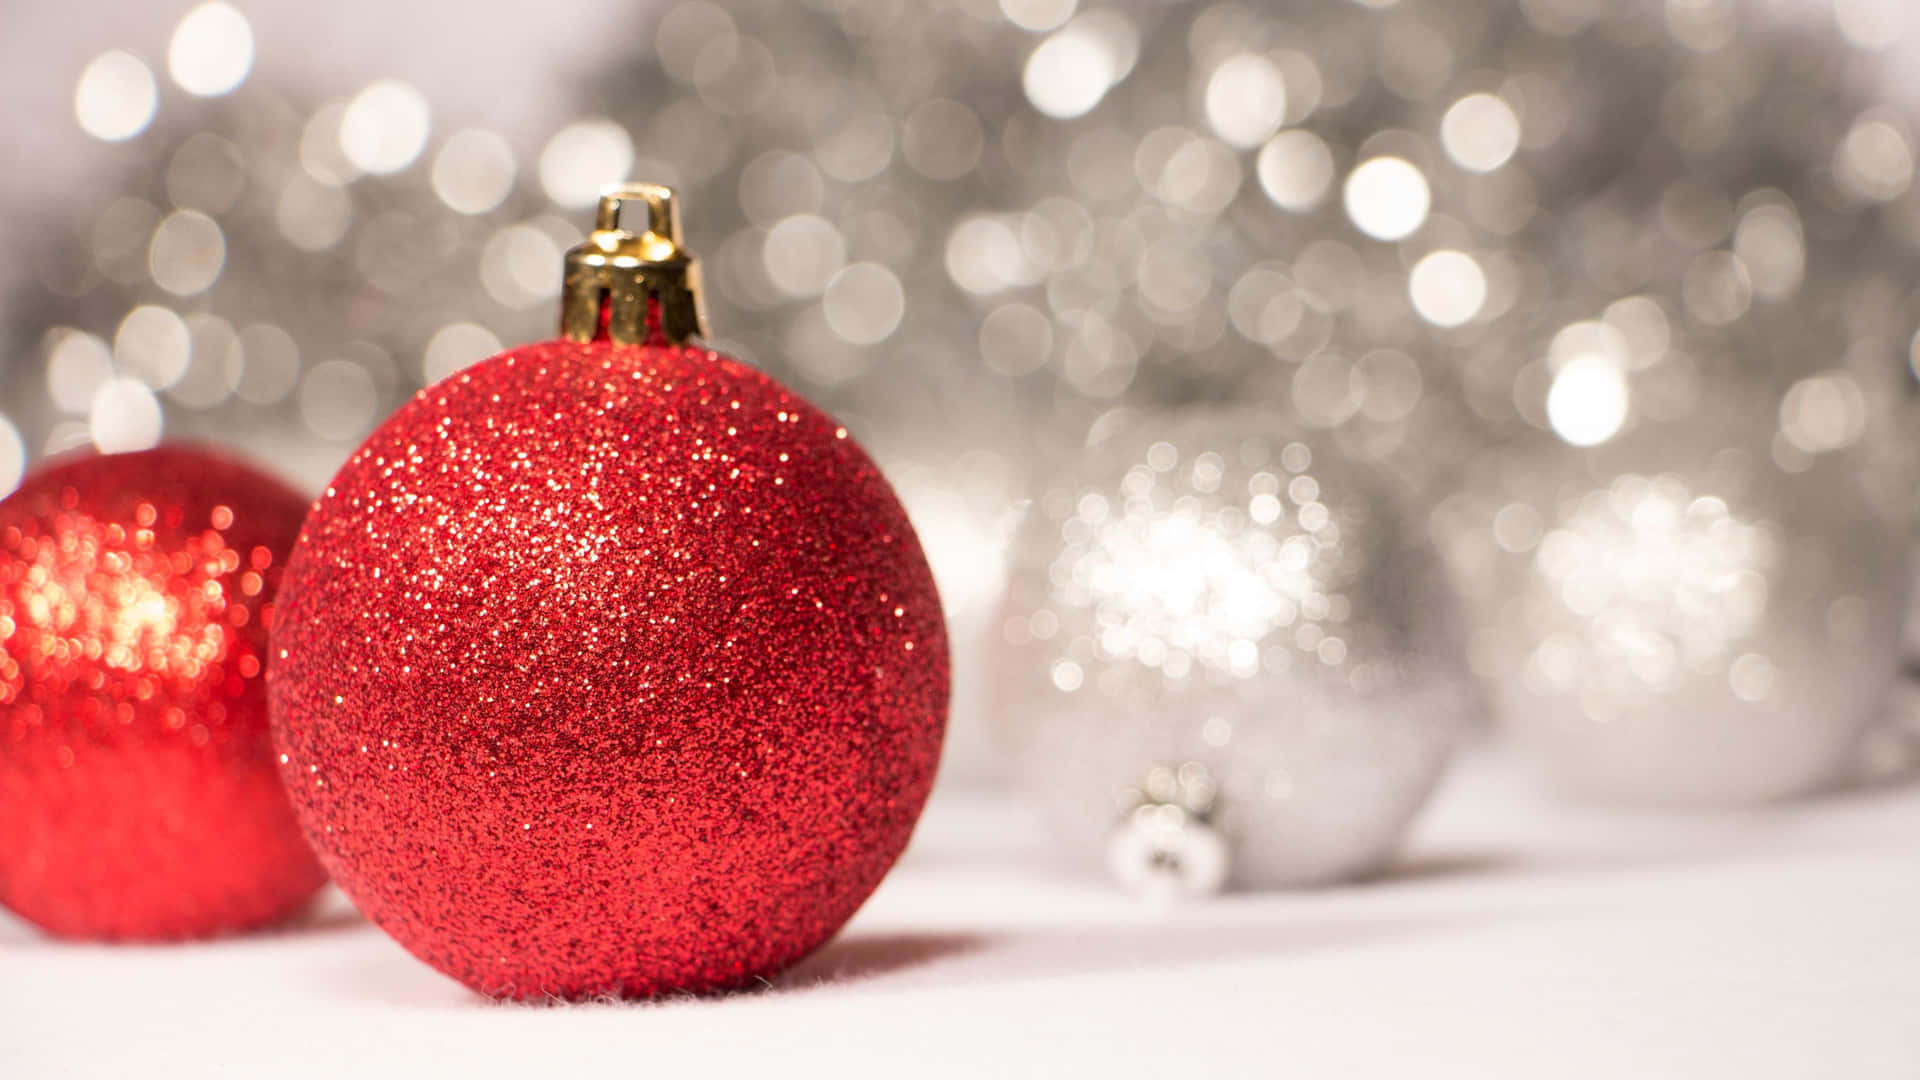 Christmas Ornaments On A White Background With Silver And Red Lights Wallpaper